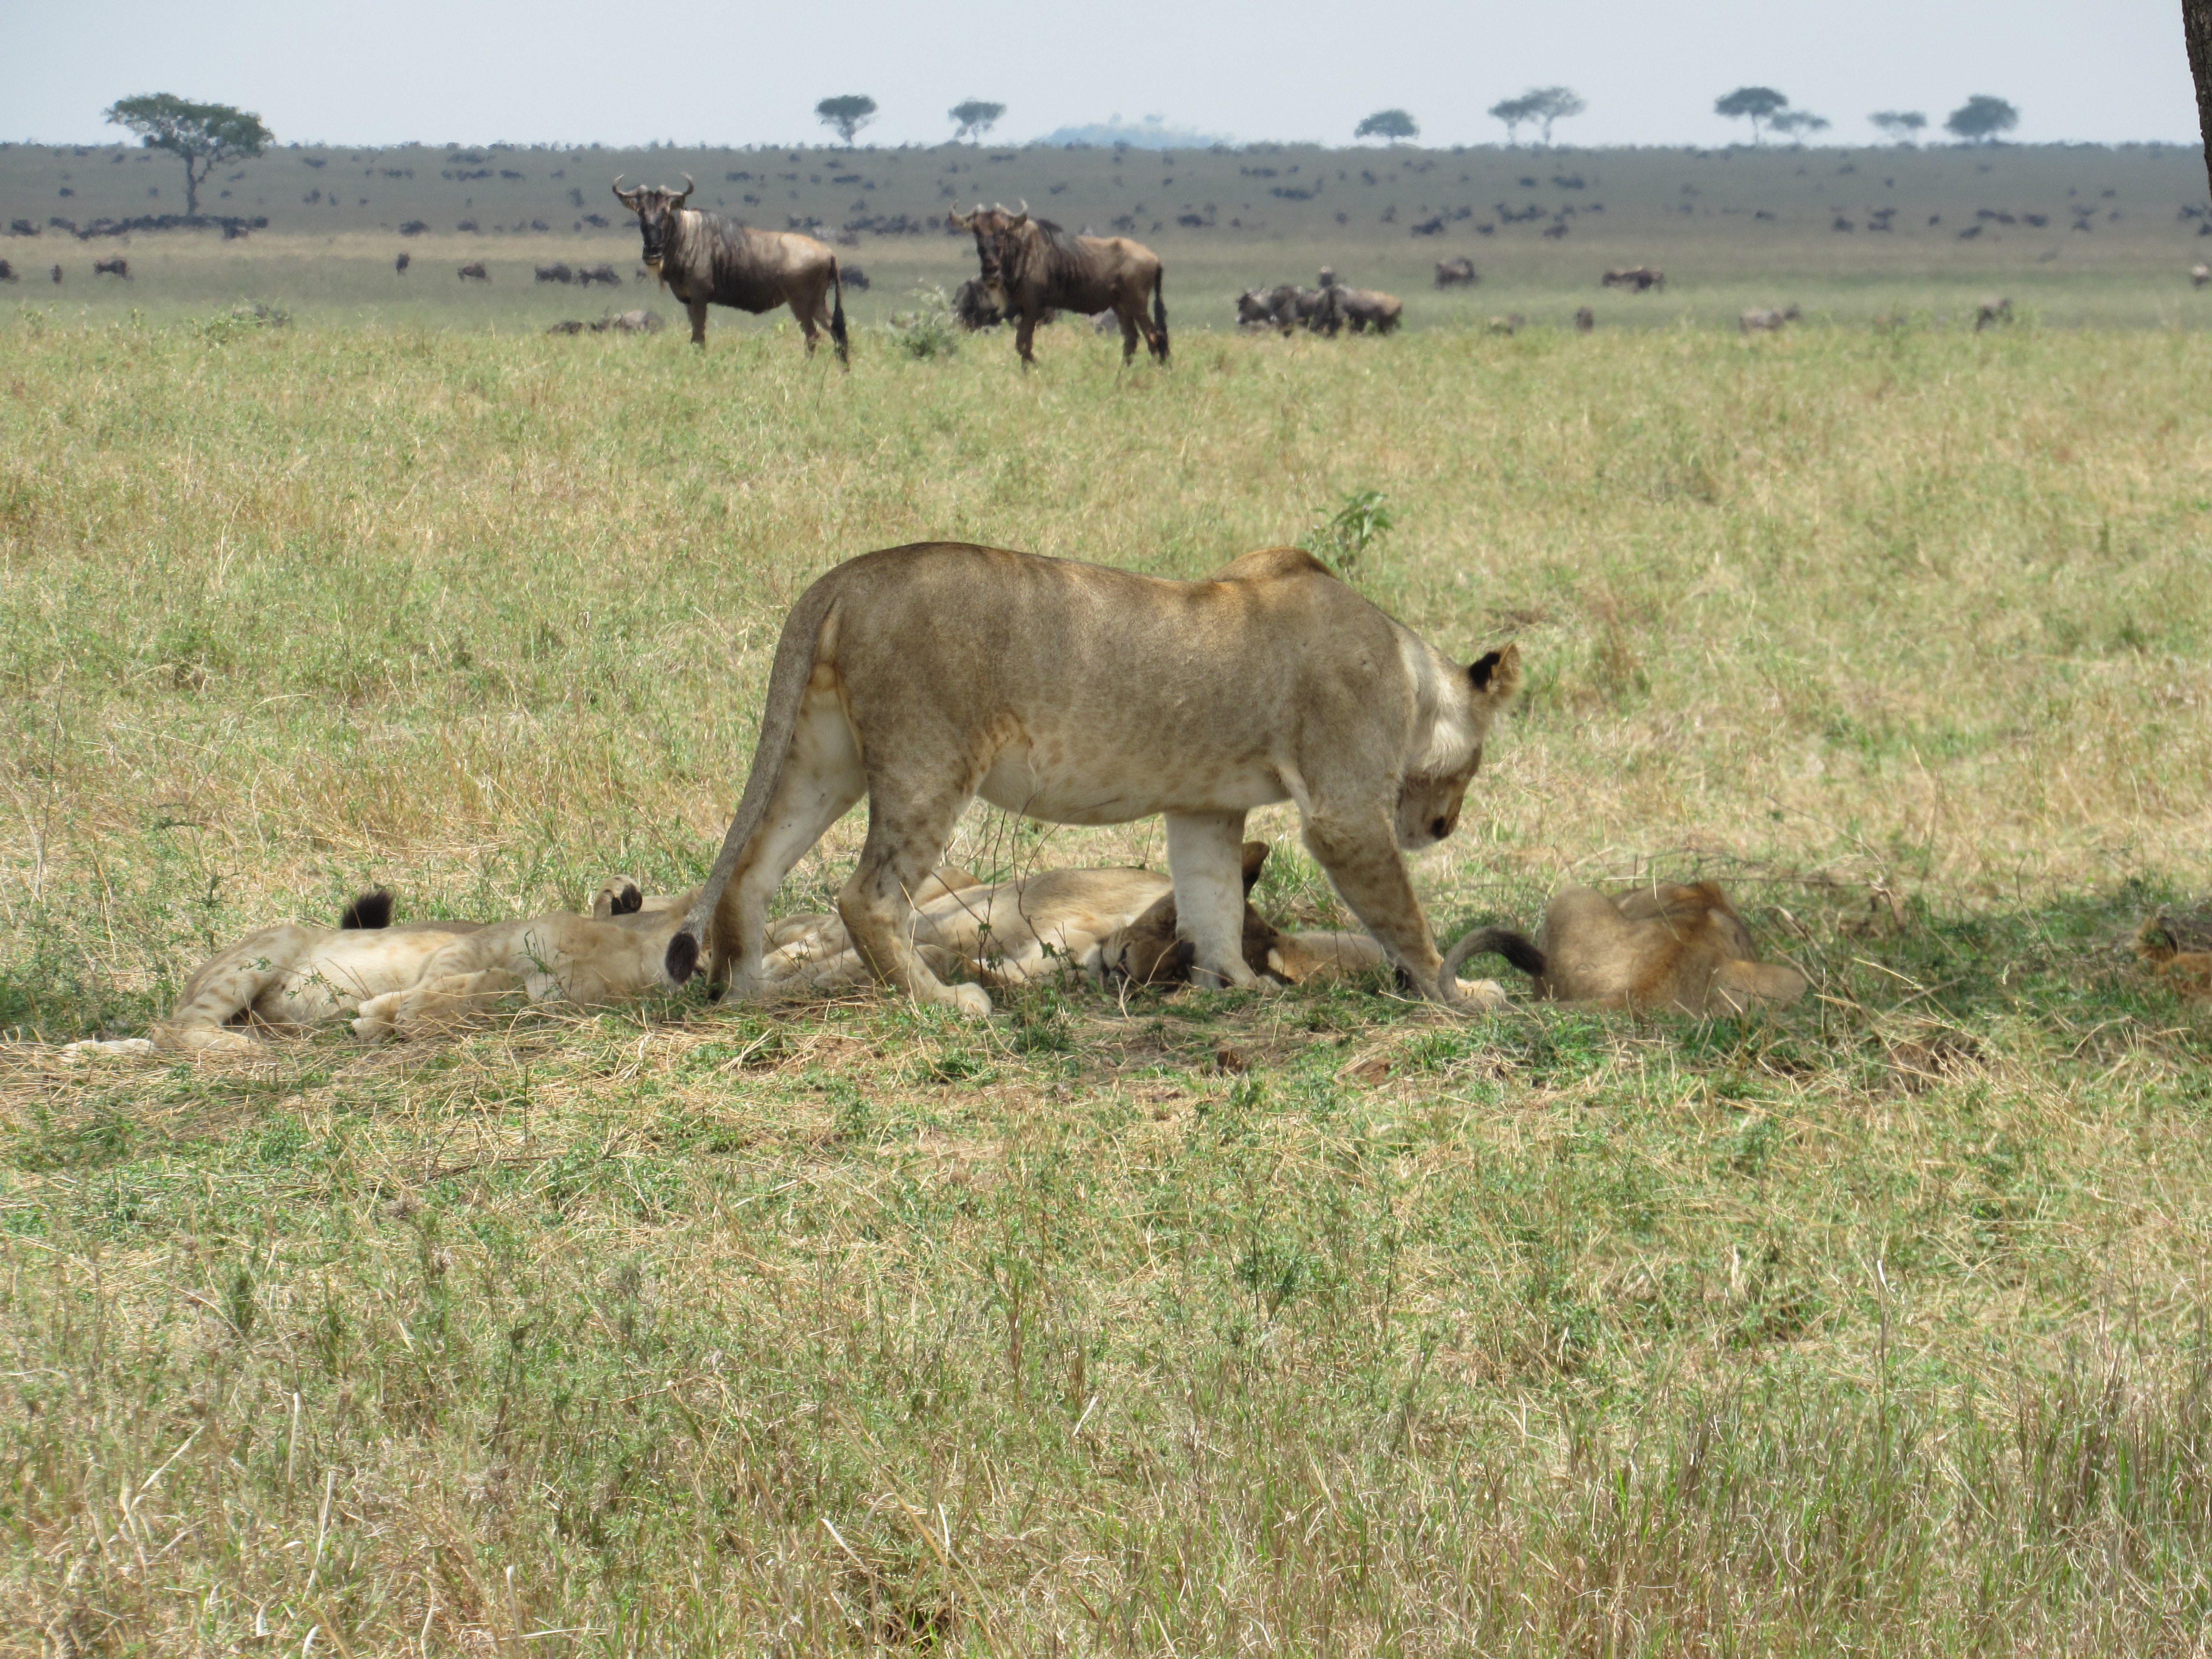 Alt text: "A pride of lions resting in the grass of the Serengeti in Tanzania, with a curious lioness approaching, while a herd of wildebeest roam in the background, depicting a serene yet wild scene on the African savanna